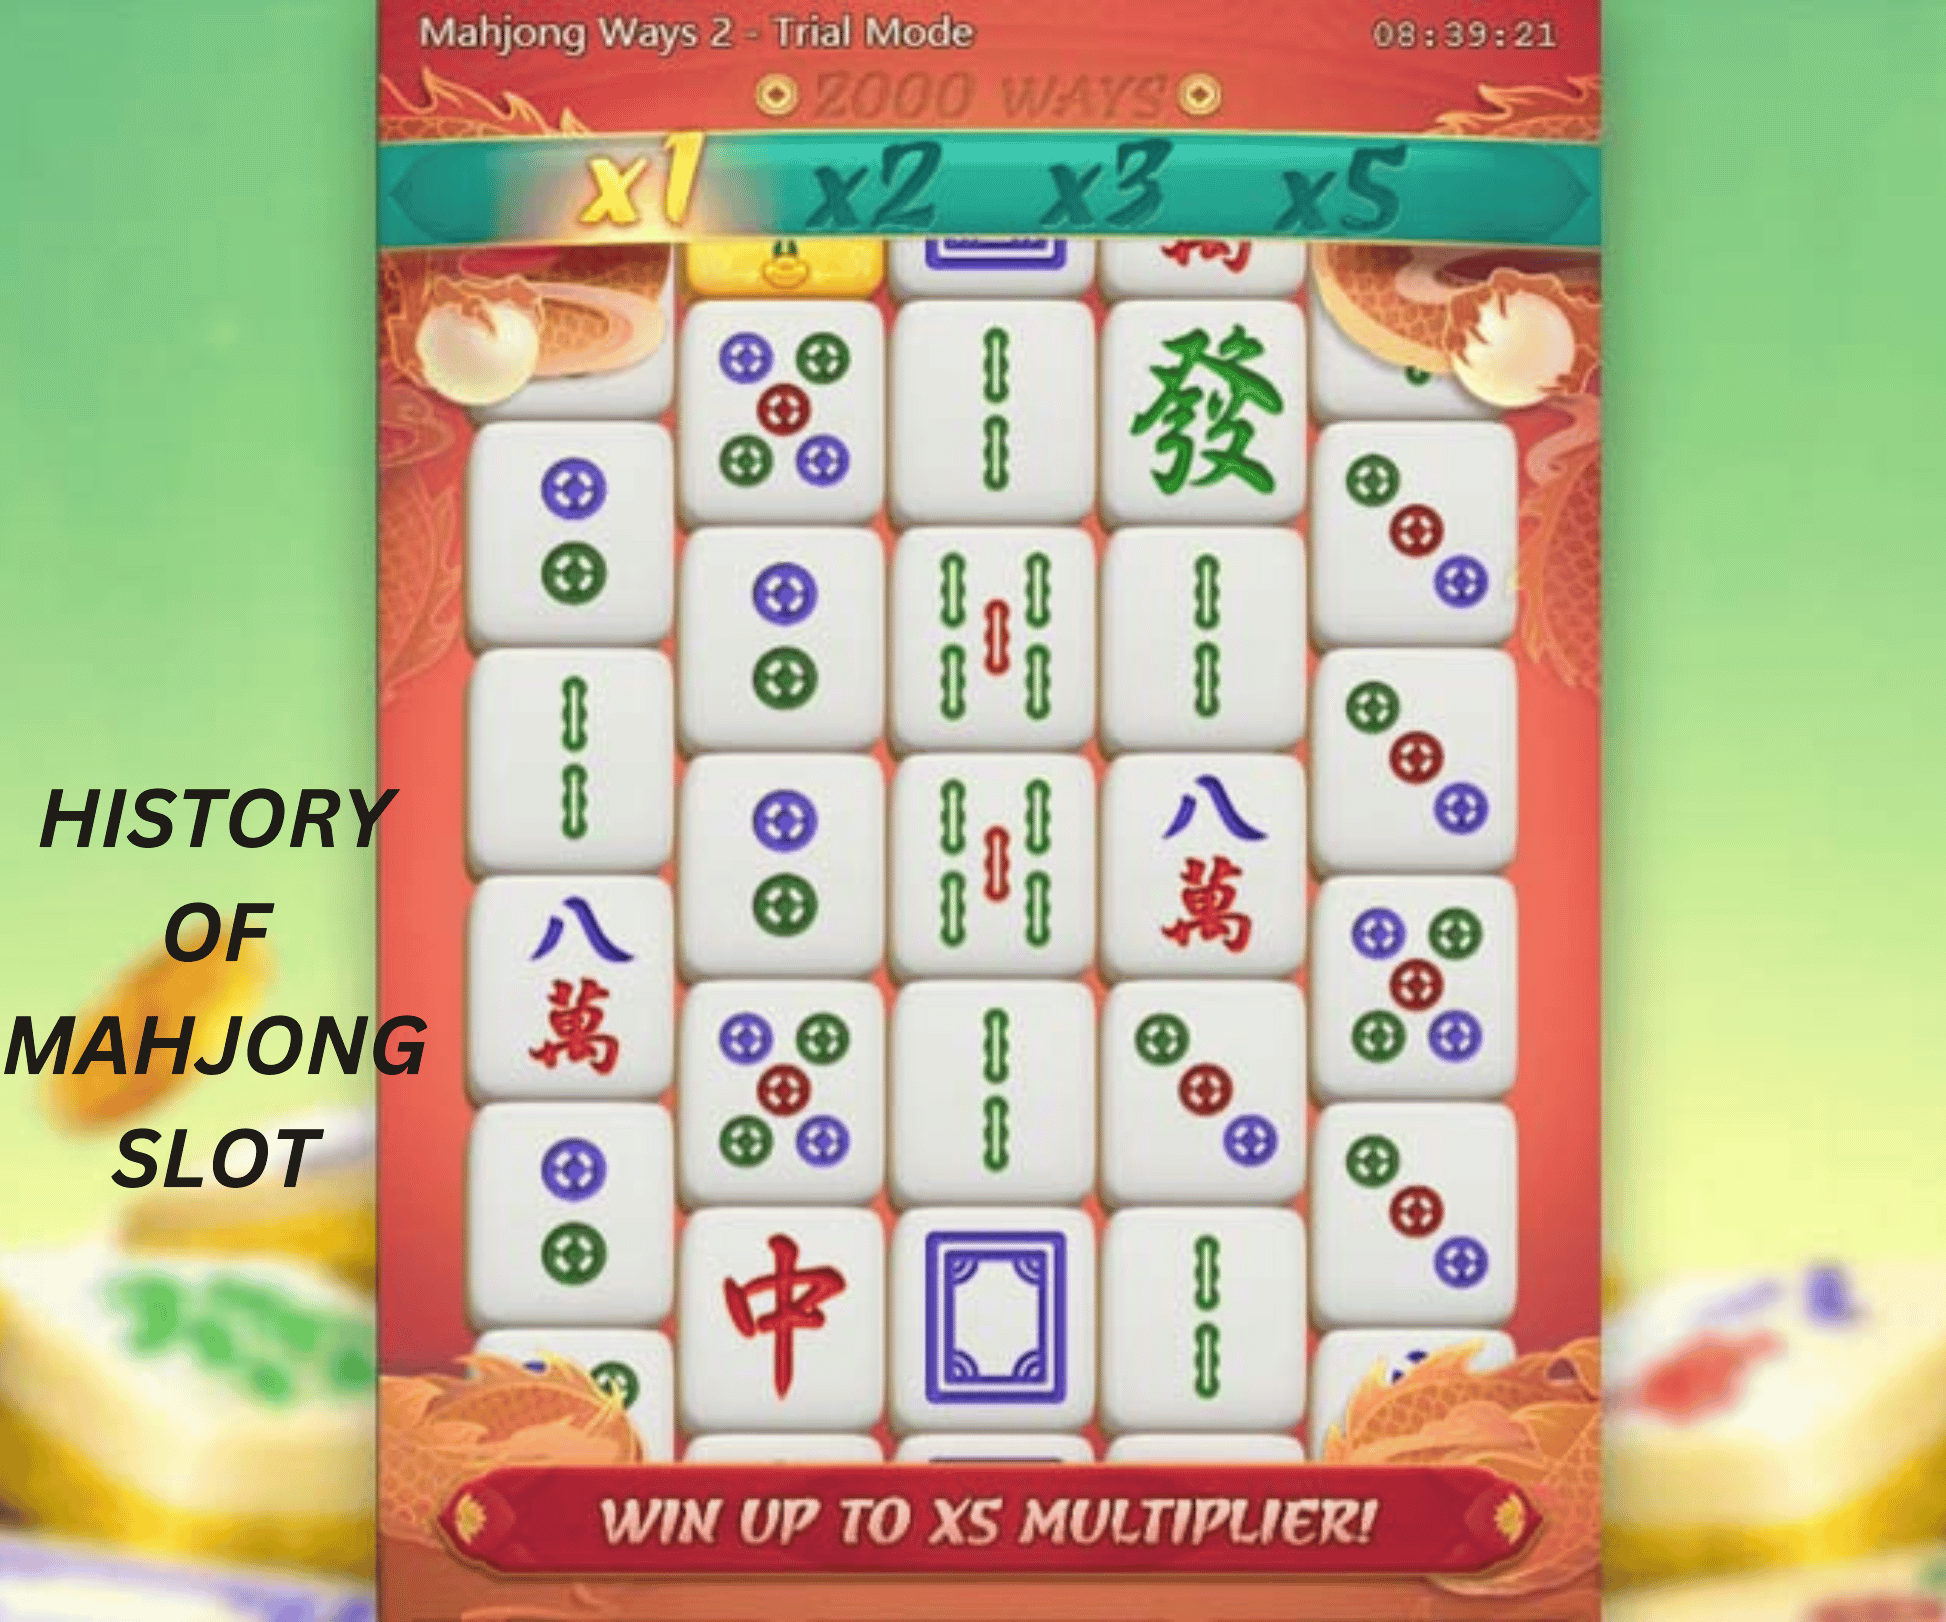 A true guide to playing mahjong slot